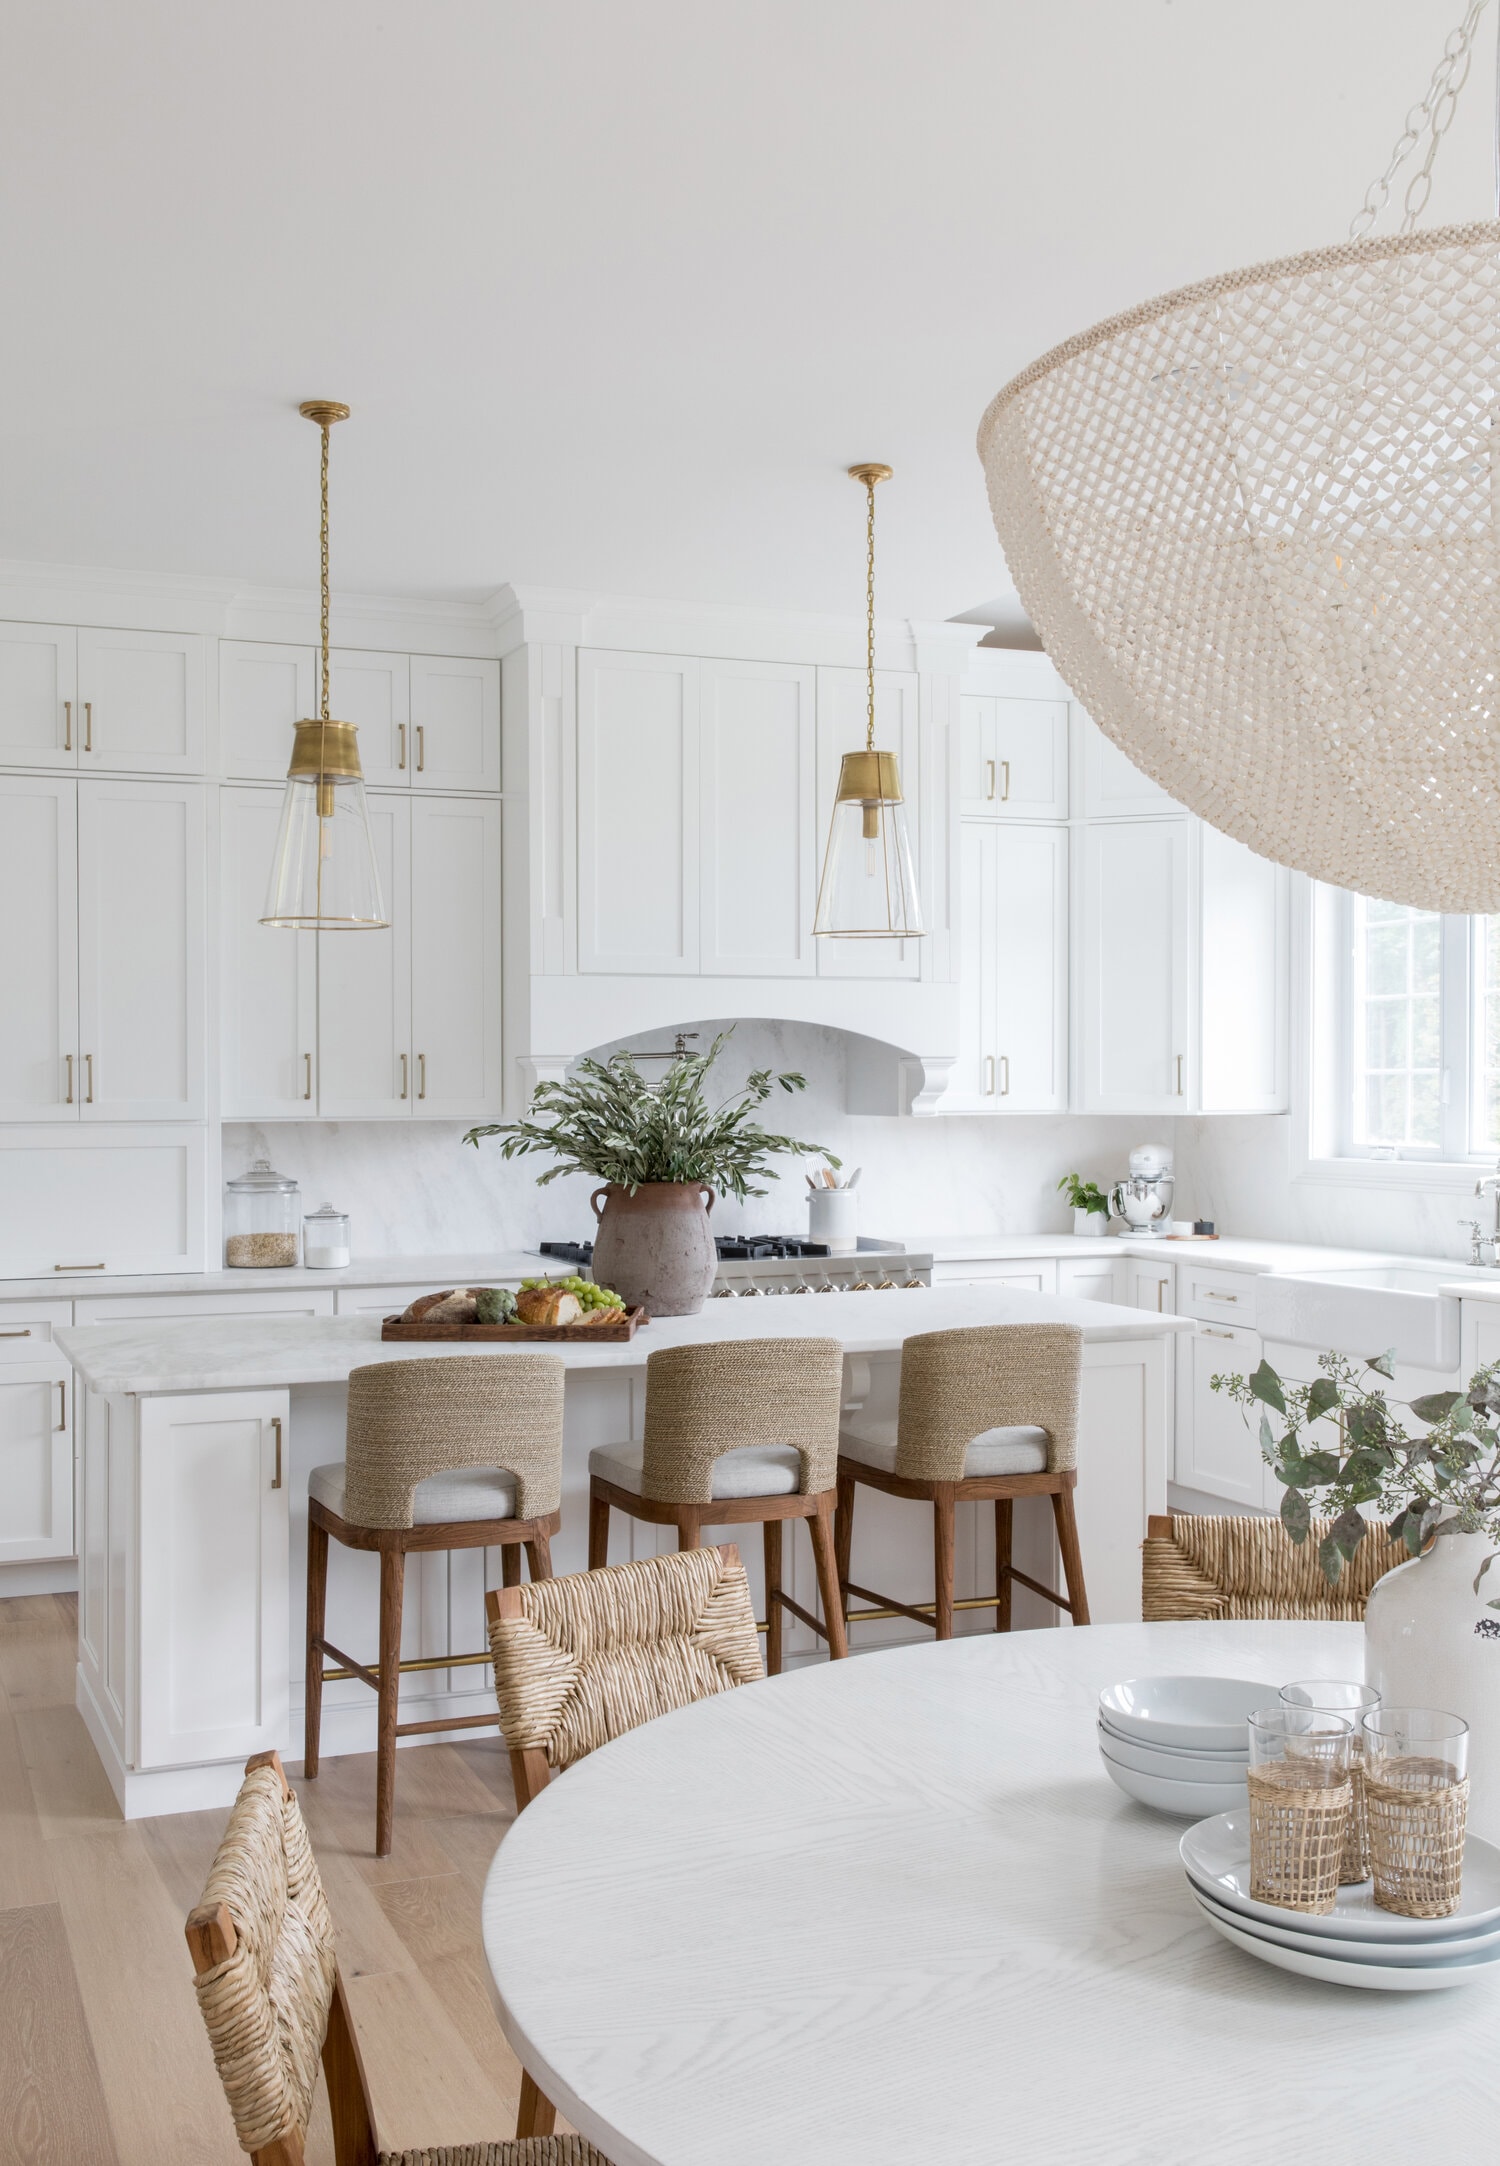 All white kitchen using barstools and chairs to add texture to the room in seagrass and jute. Gold lighting and hardware.